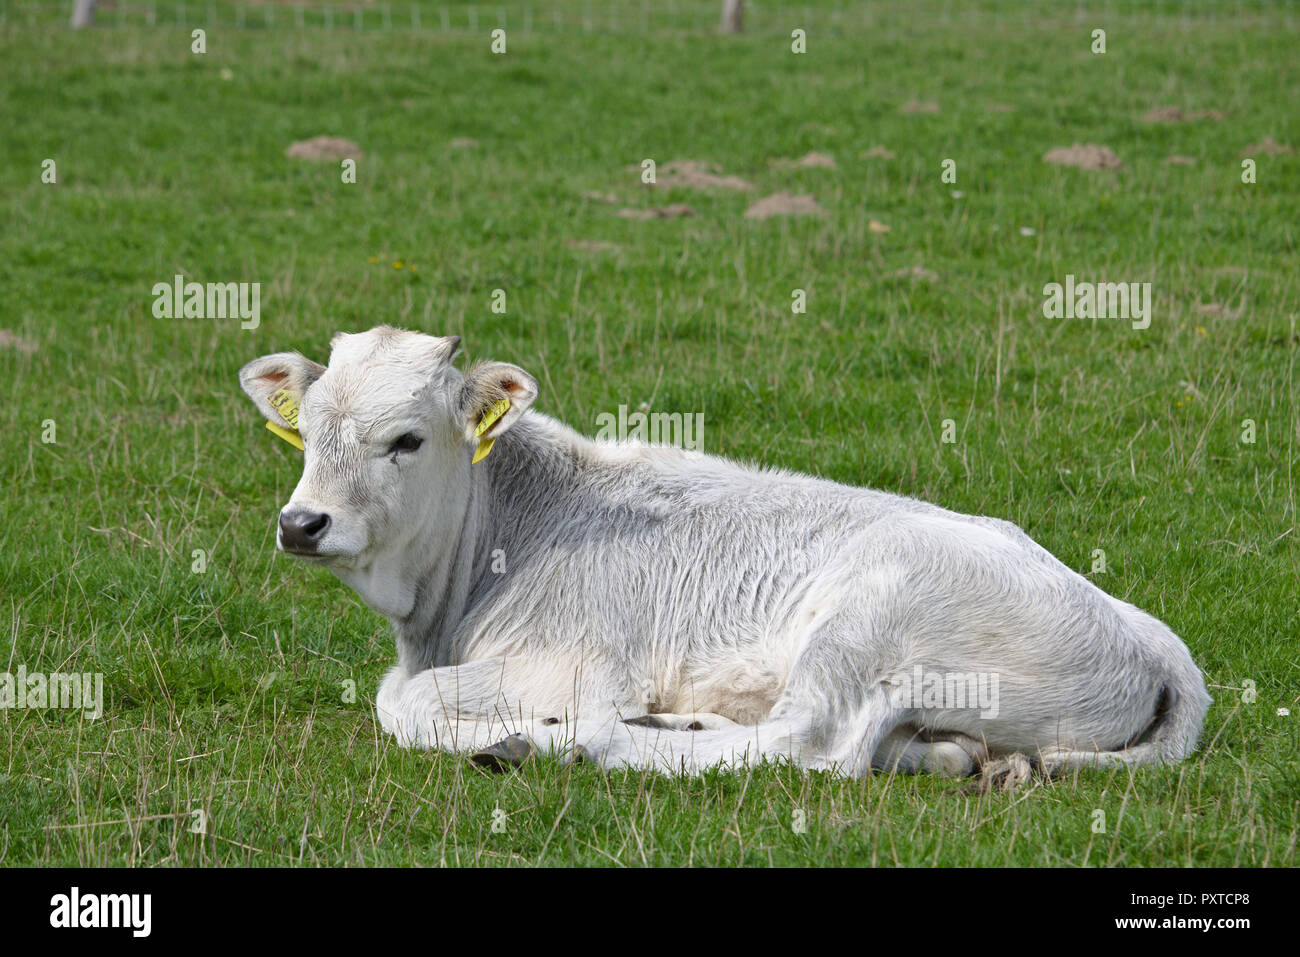 Portrait of a white calf lying on a green pasture Stock Photo